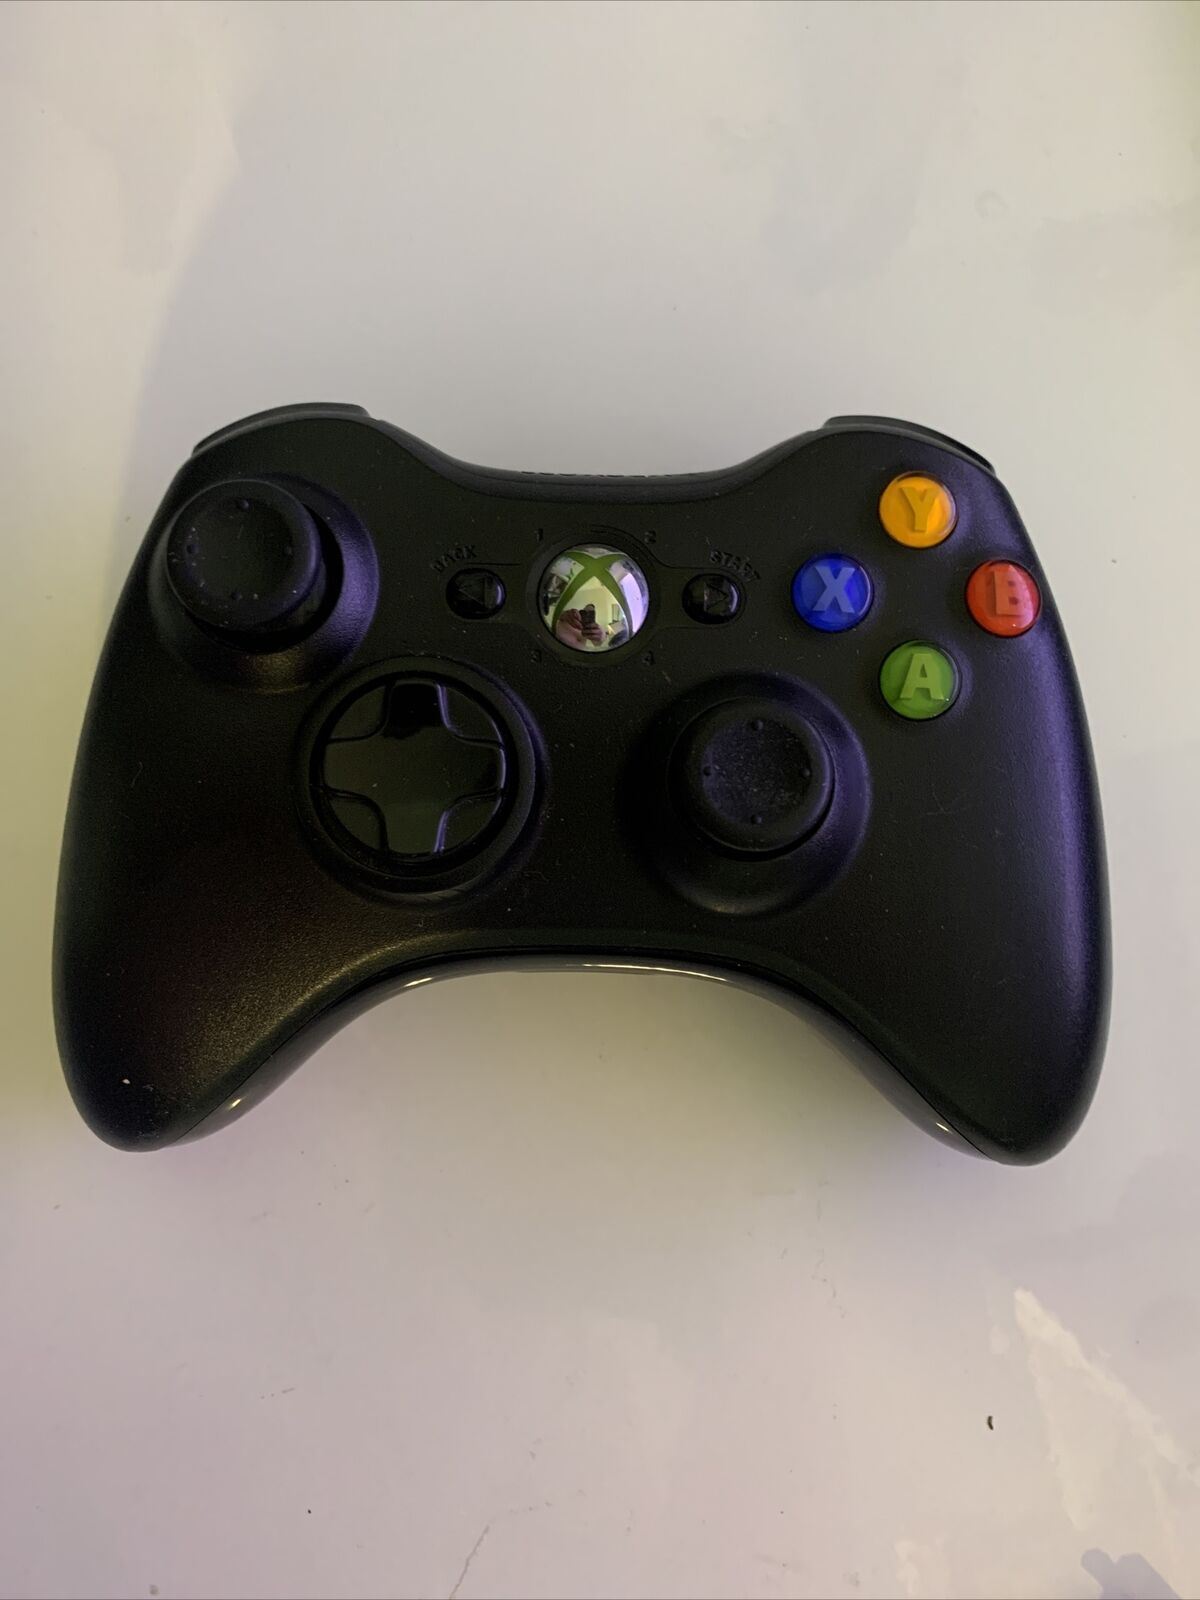 Official Microsoft Xbox 360 Wireless Controller - Black Tested & Working Genuine